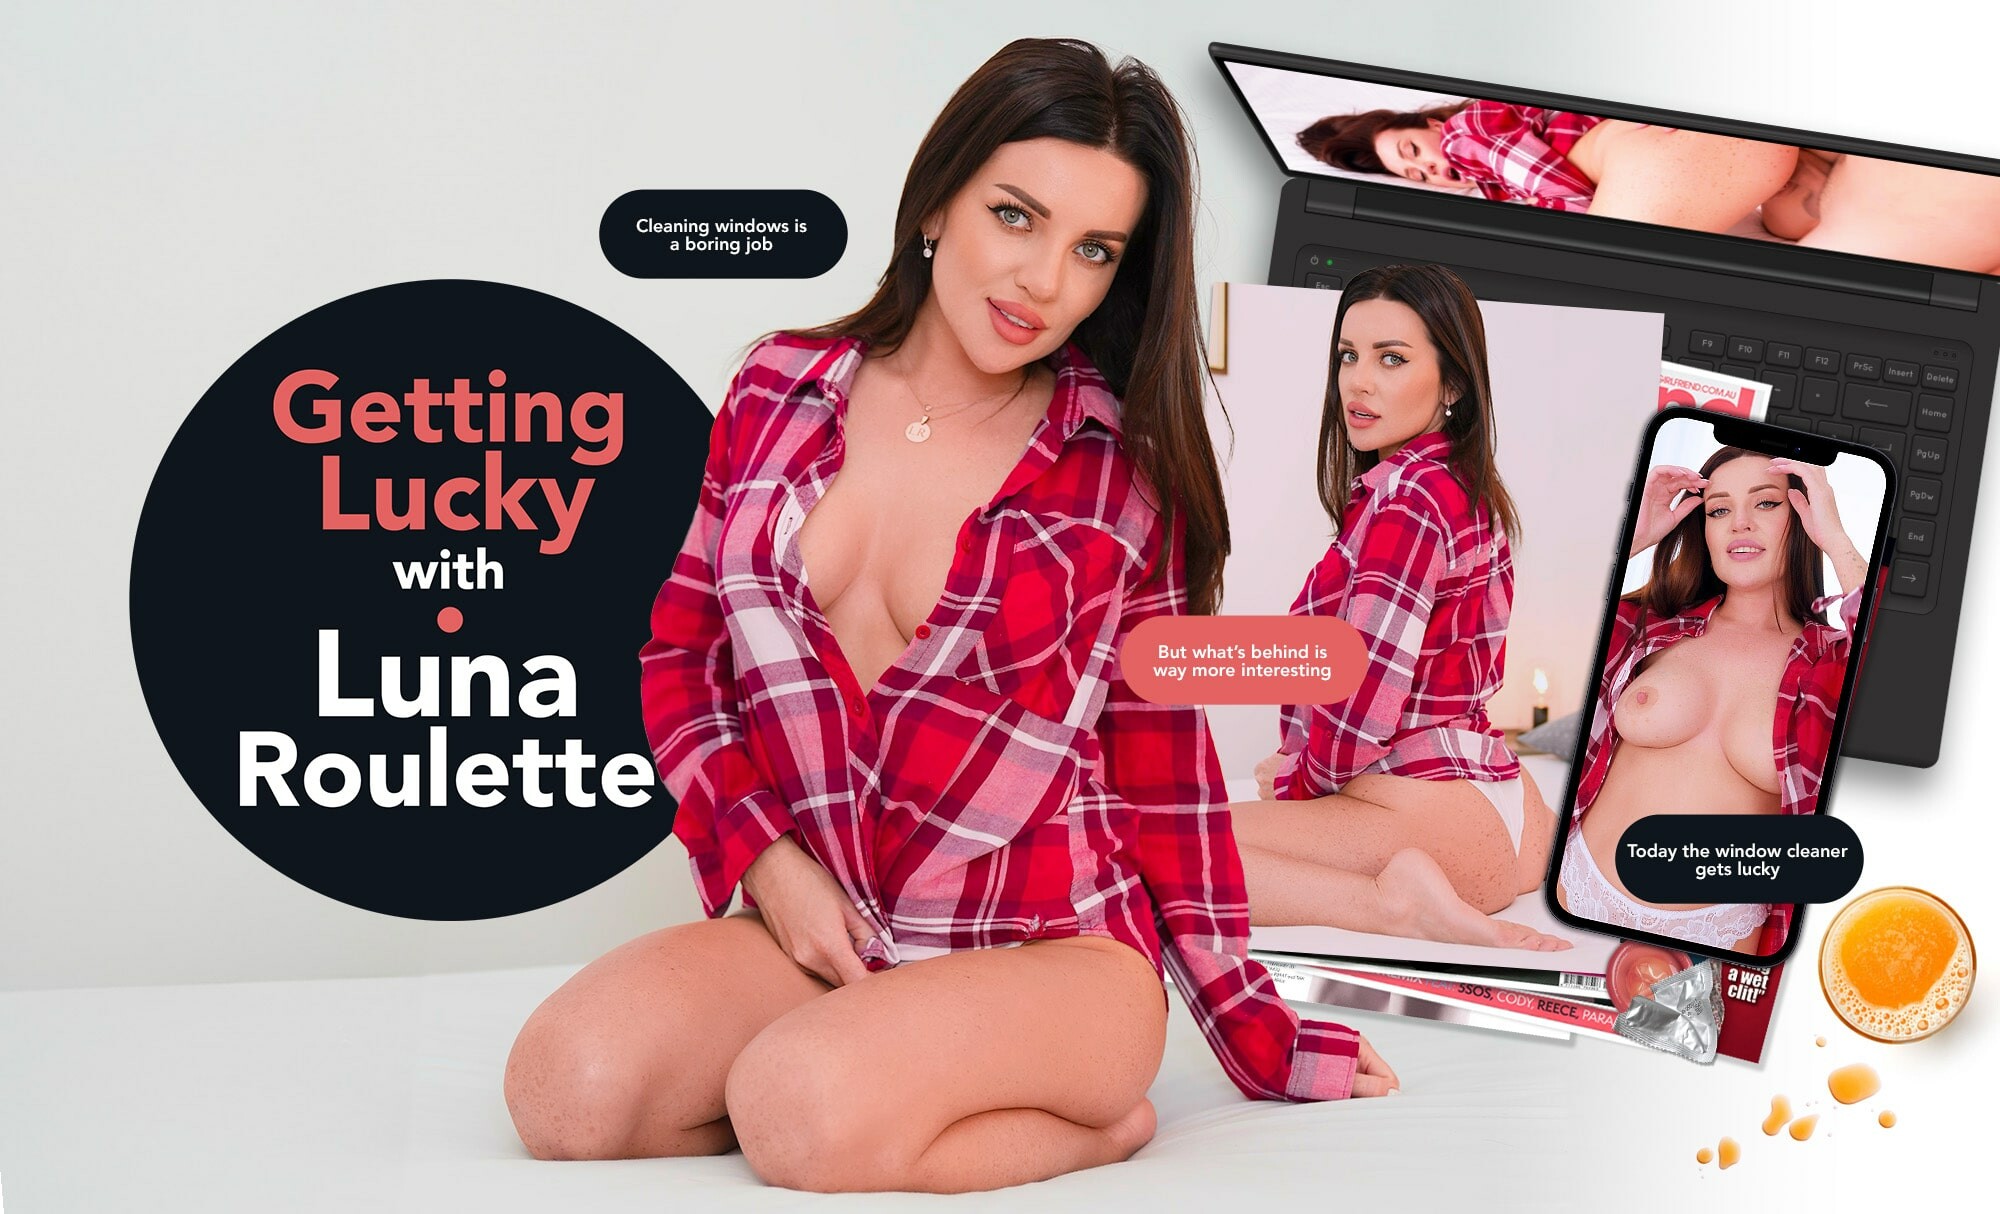 Getting Lucky with Luna Roulette – Luna Roulette – Life Selector